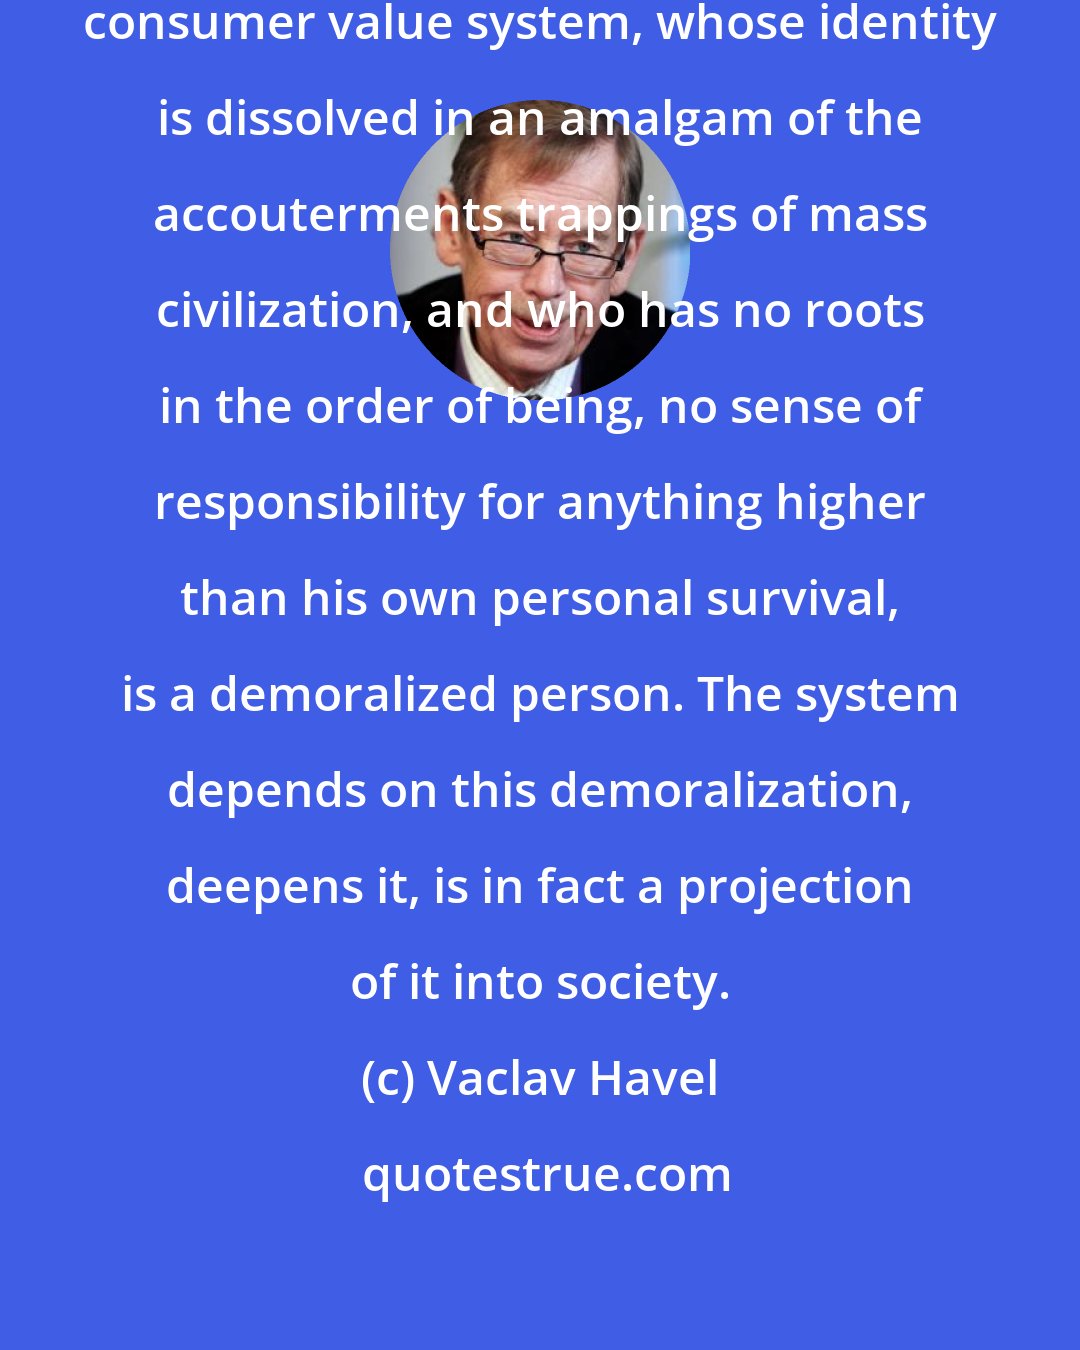 Vaclav Havel: A person who has been seduced by the consumer value system, whose identity is dissolved in an amalgam of the accouterments trappings of mass civilization, and who has no roots in the order of being, no sense of responsibility for anything higher than his own personal survival, is a demoralized person. The system depends on this demoralization, deepens it, is in fact a projection of it into society.